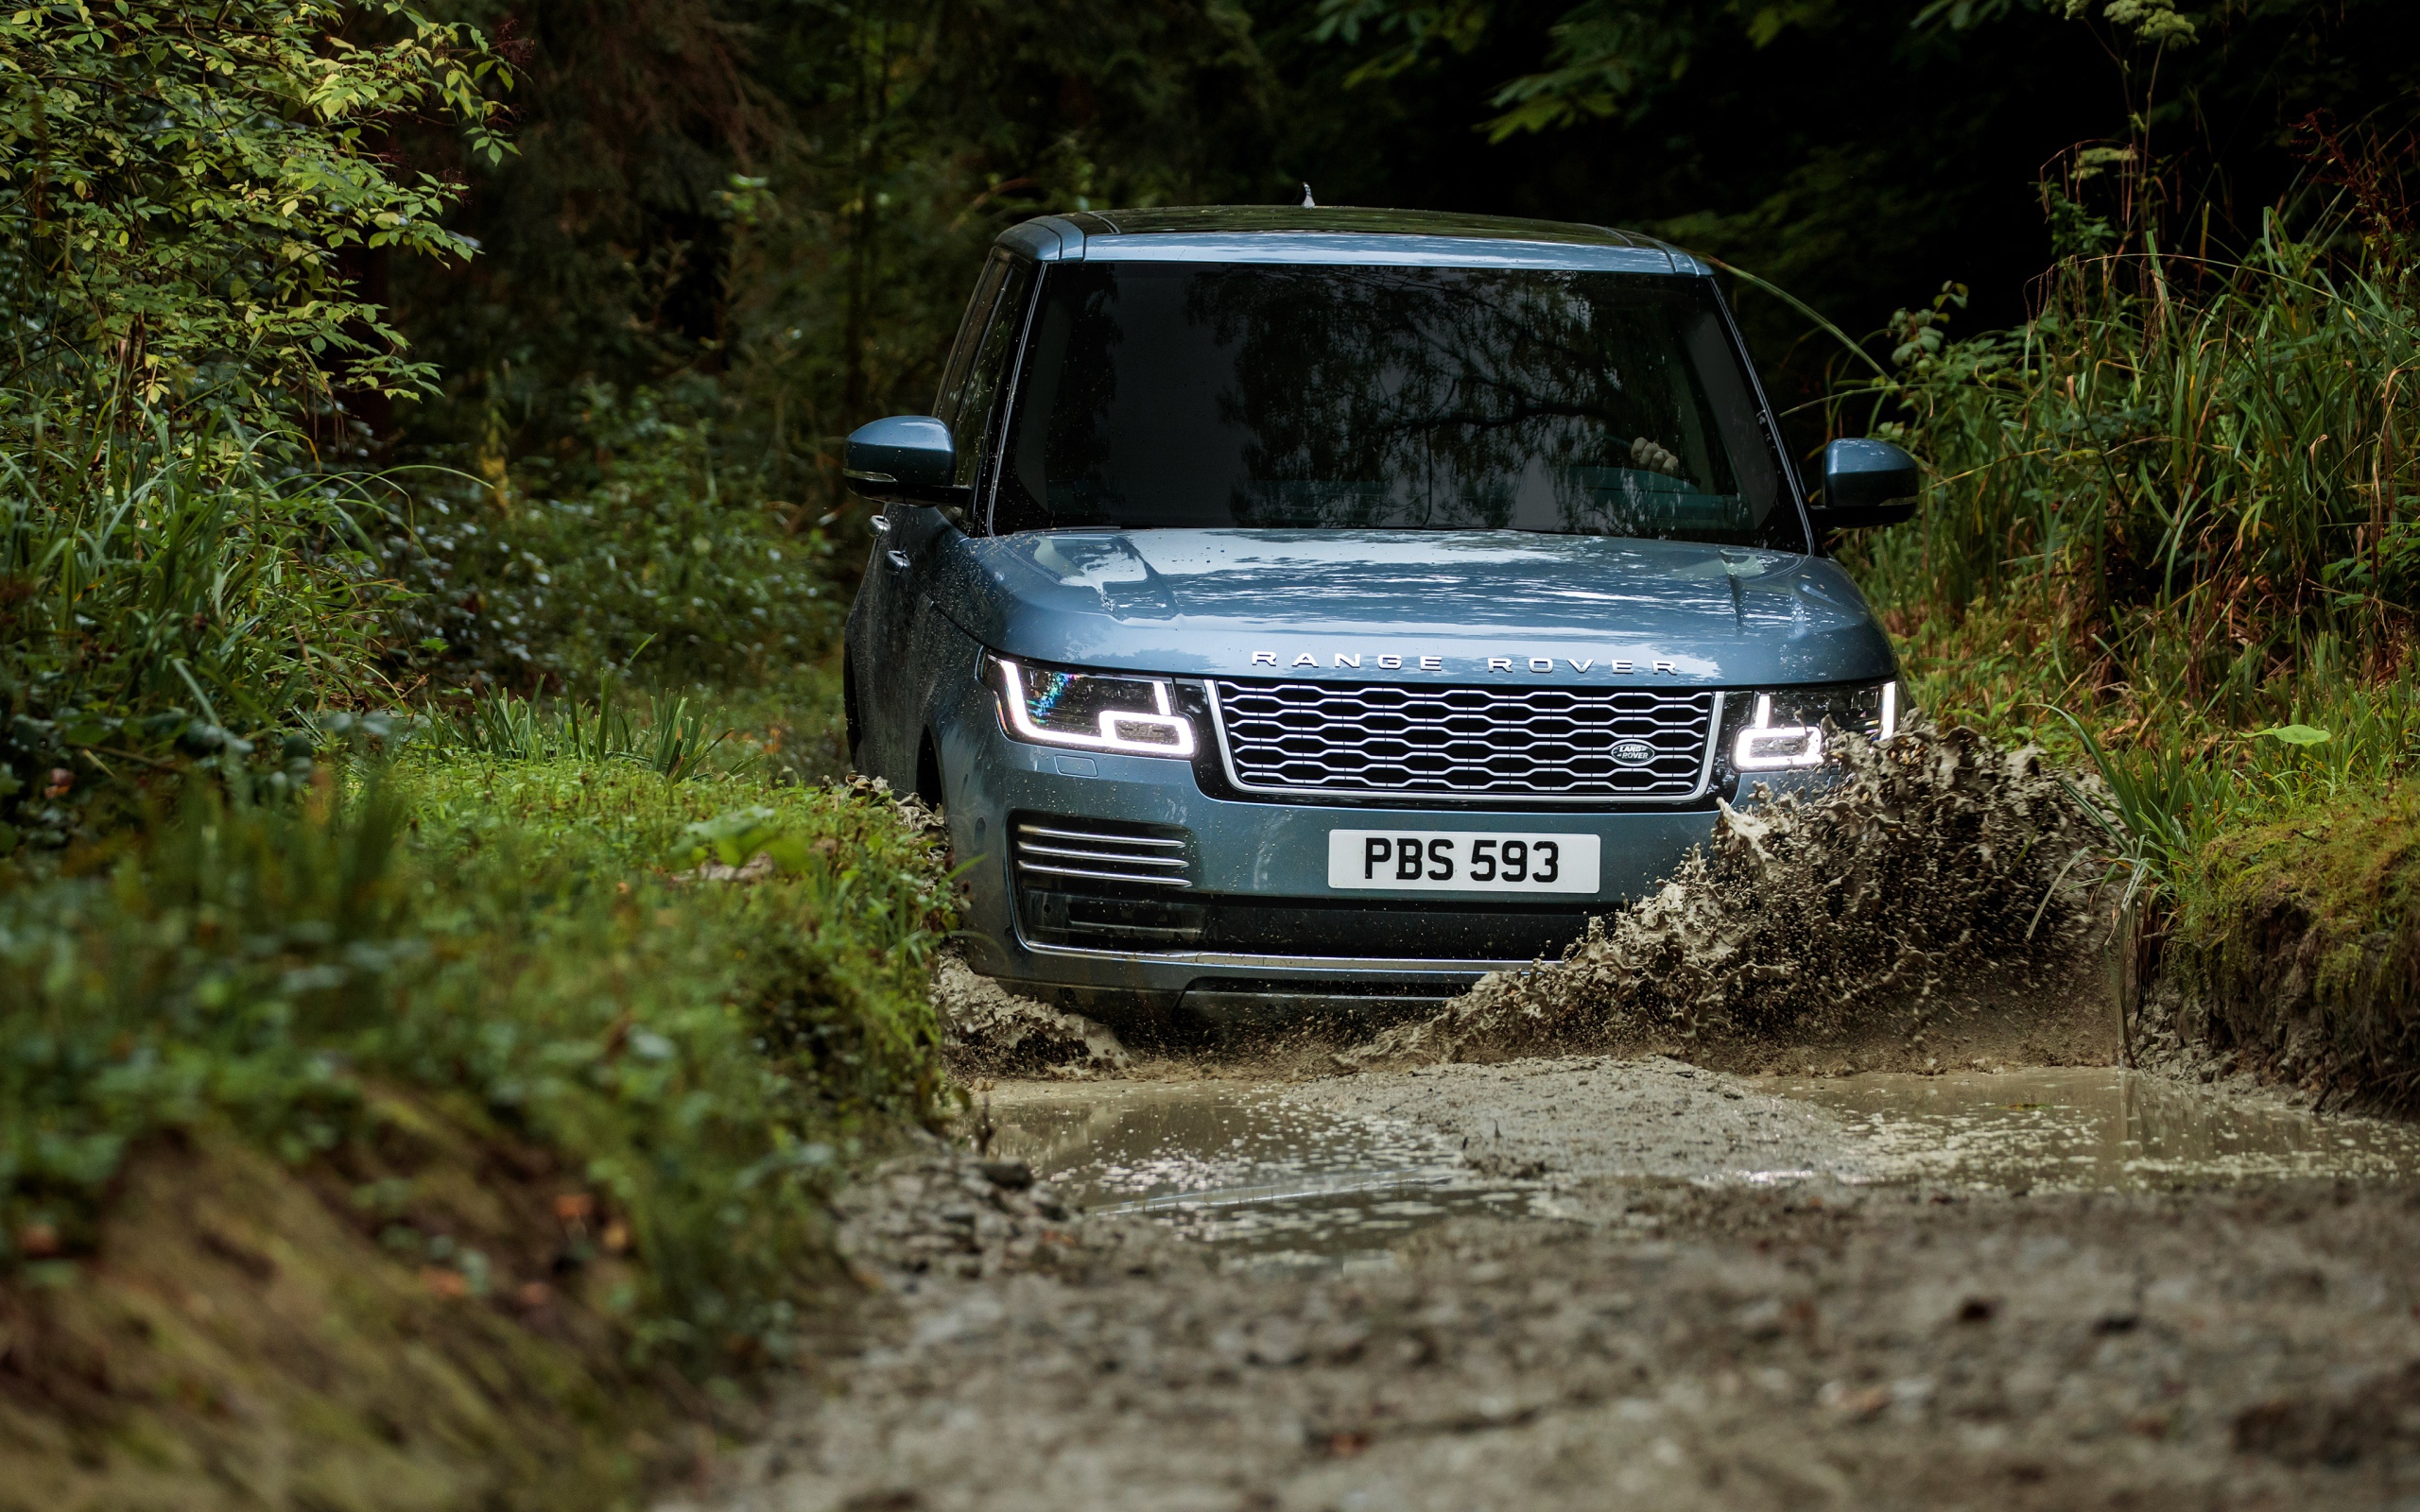 Off-road Range Rover Autobiography, 2017 rides on water